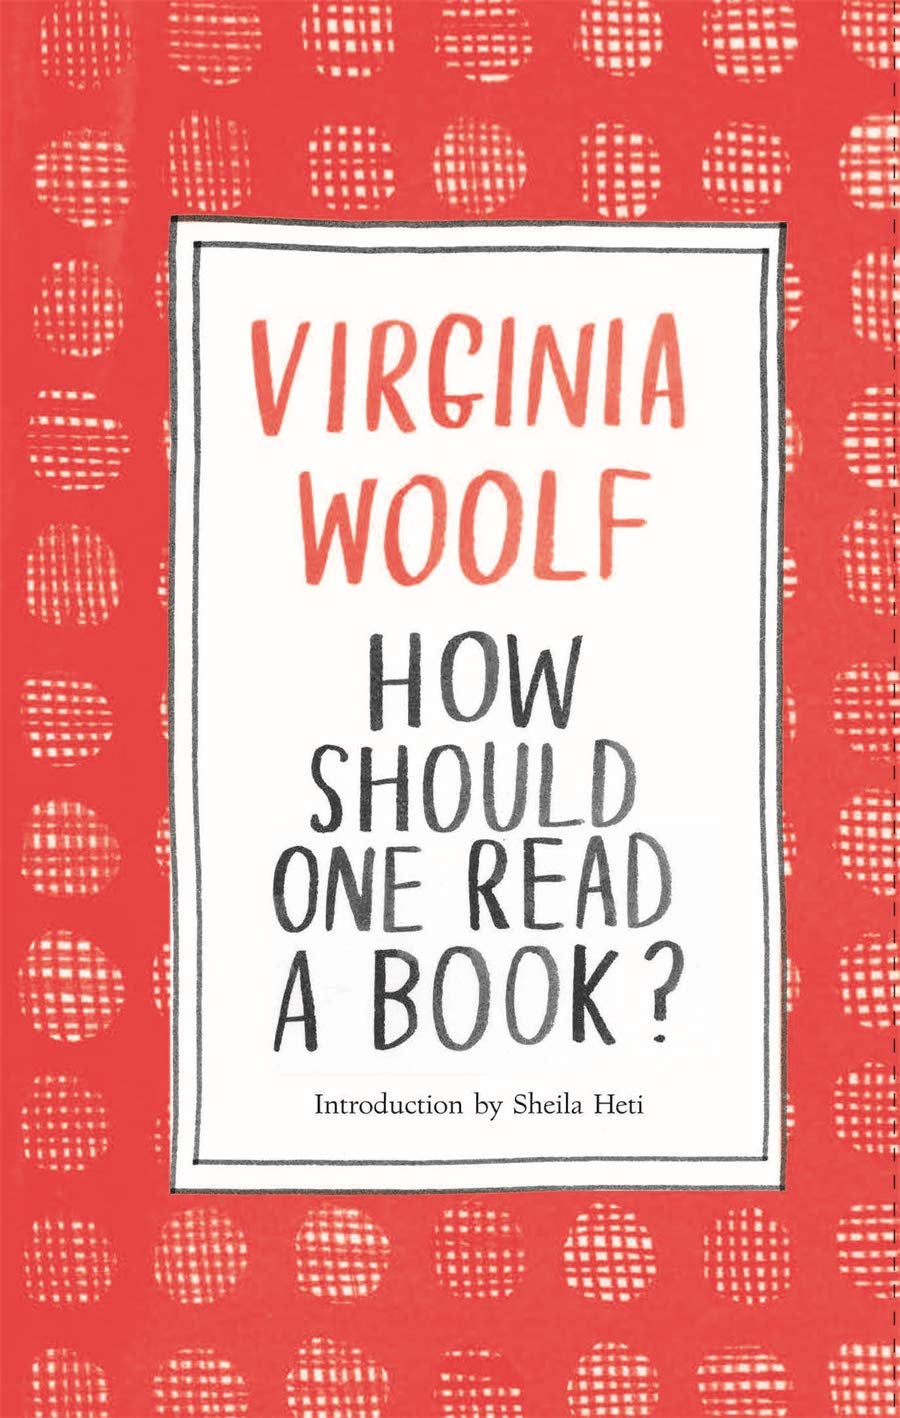 How Should One Read a Book? | Virginia Woolf